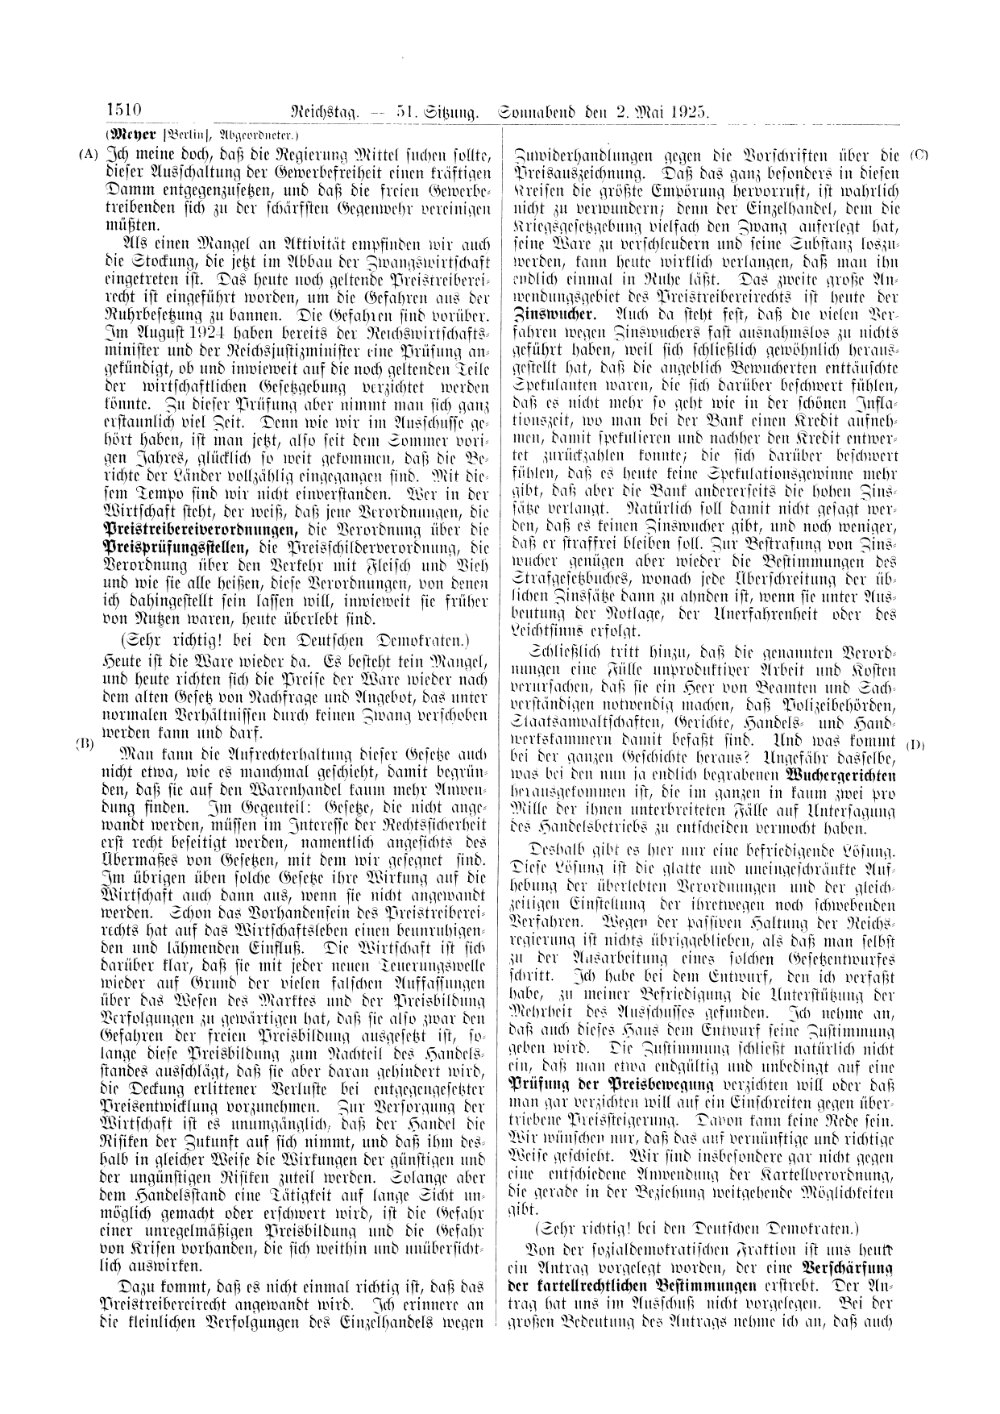 Scan of page 1510